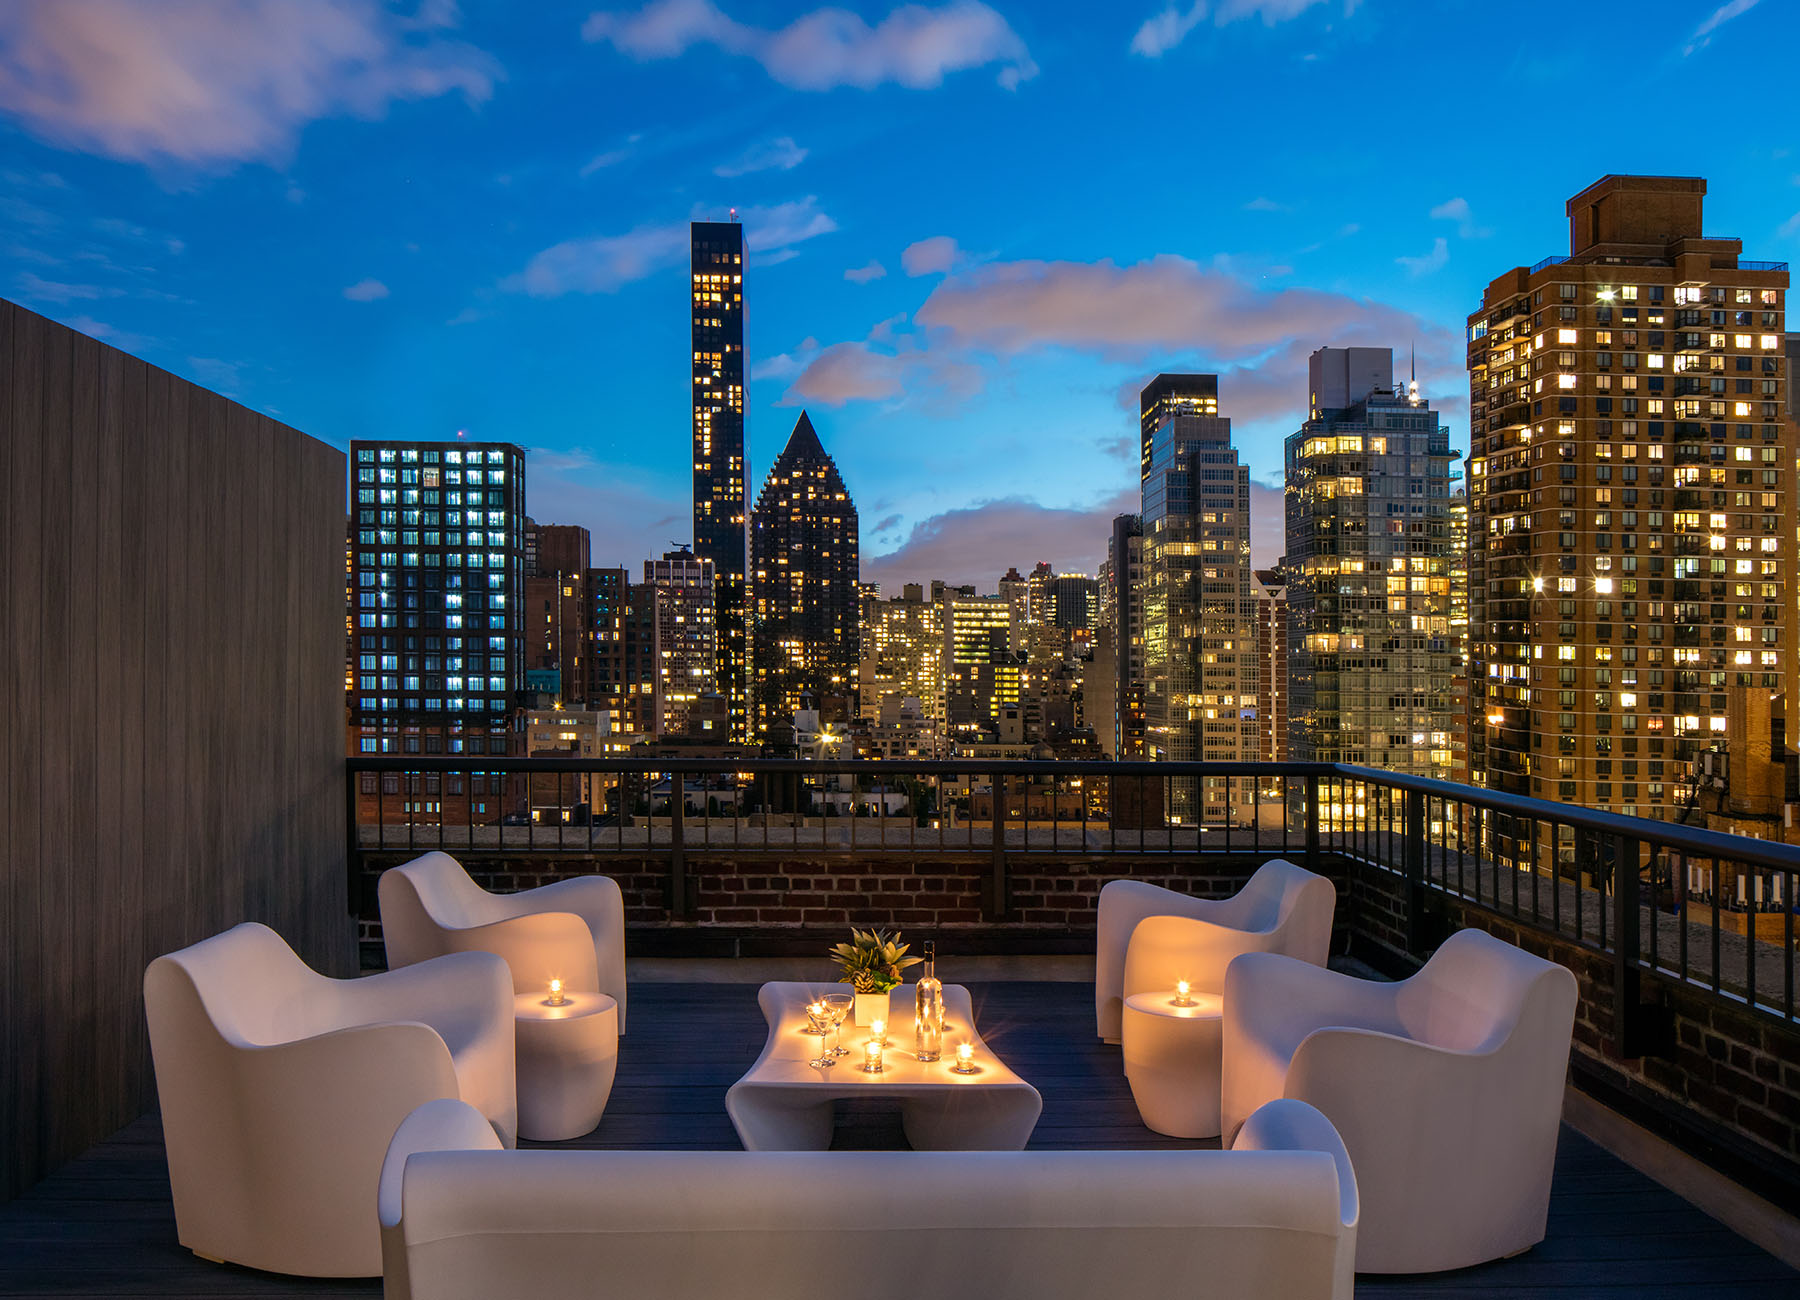 AKA Sutton Place penthouse exterior patio at dusk with views of the Manhattan skyline